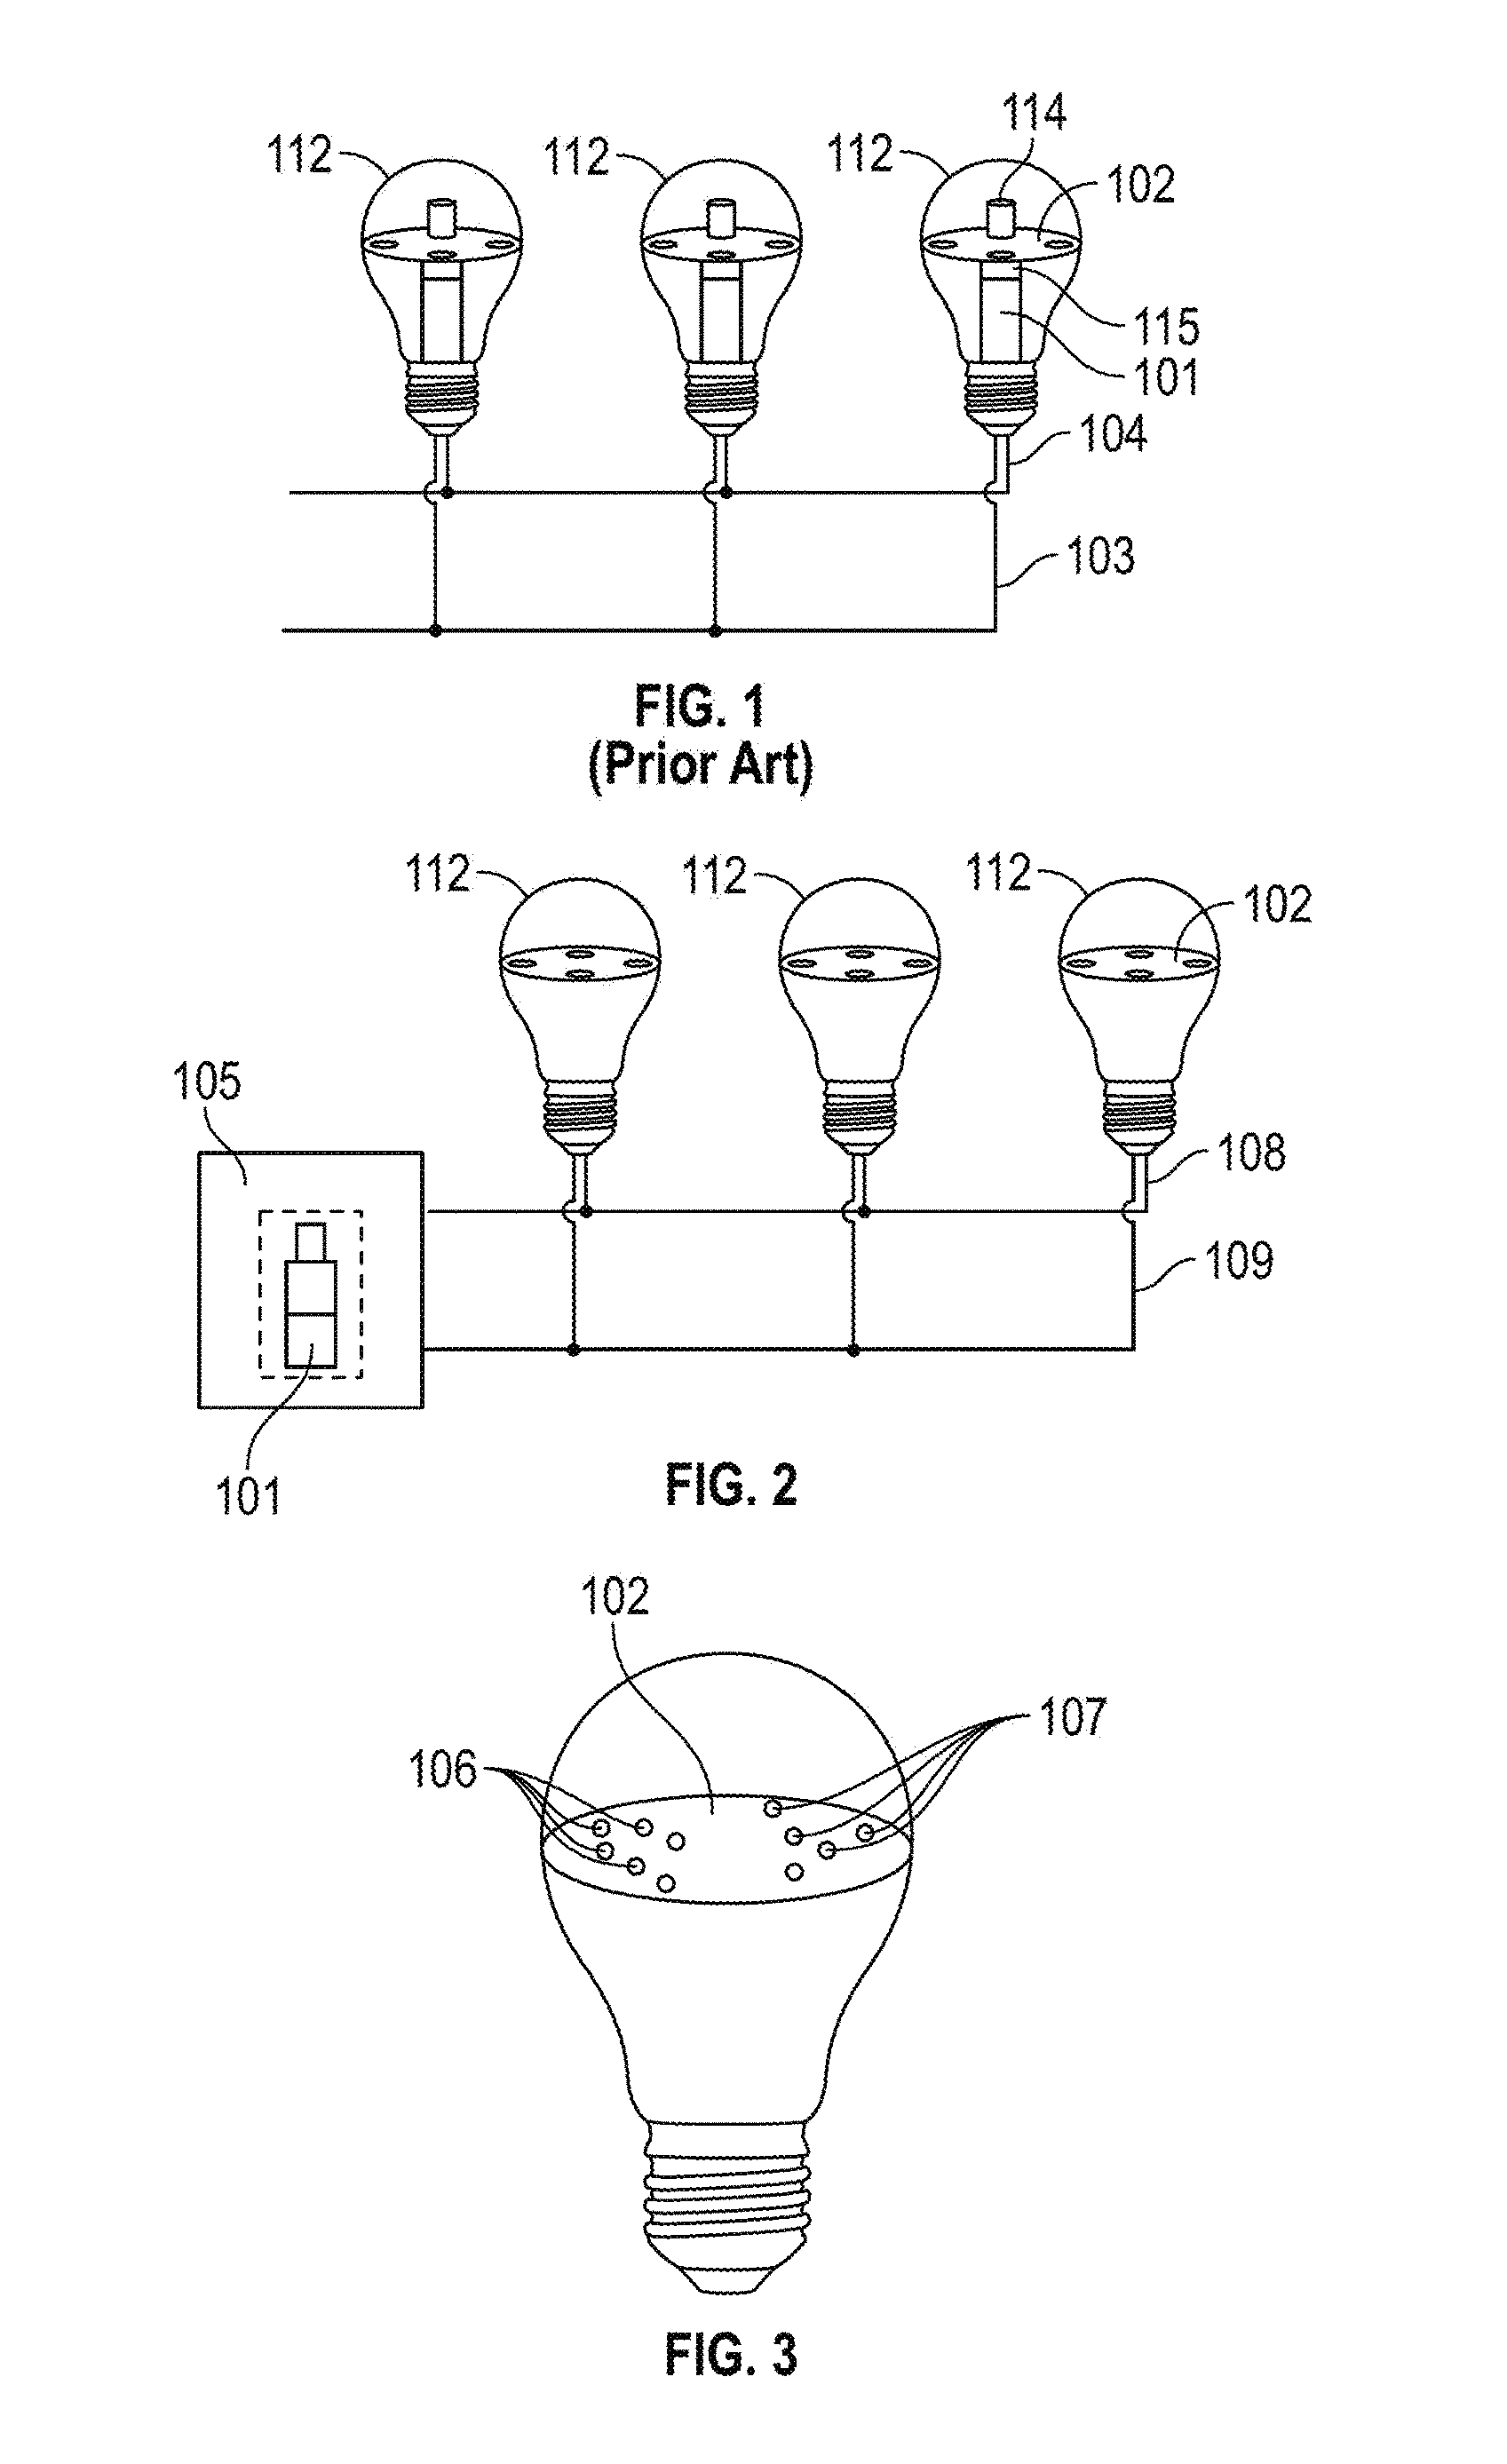 Systems and methods for optimizing power and control of a multicolored lighting system